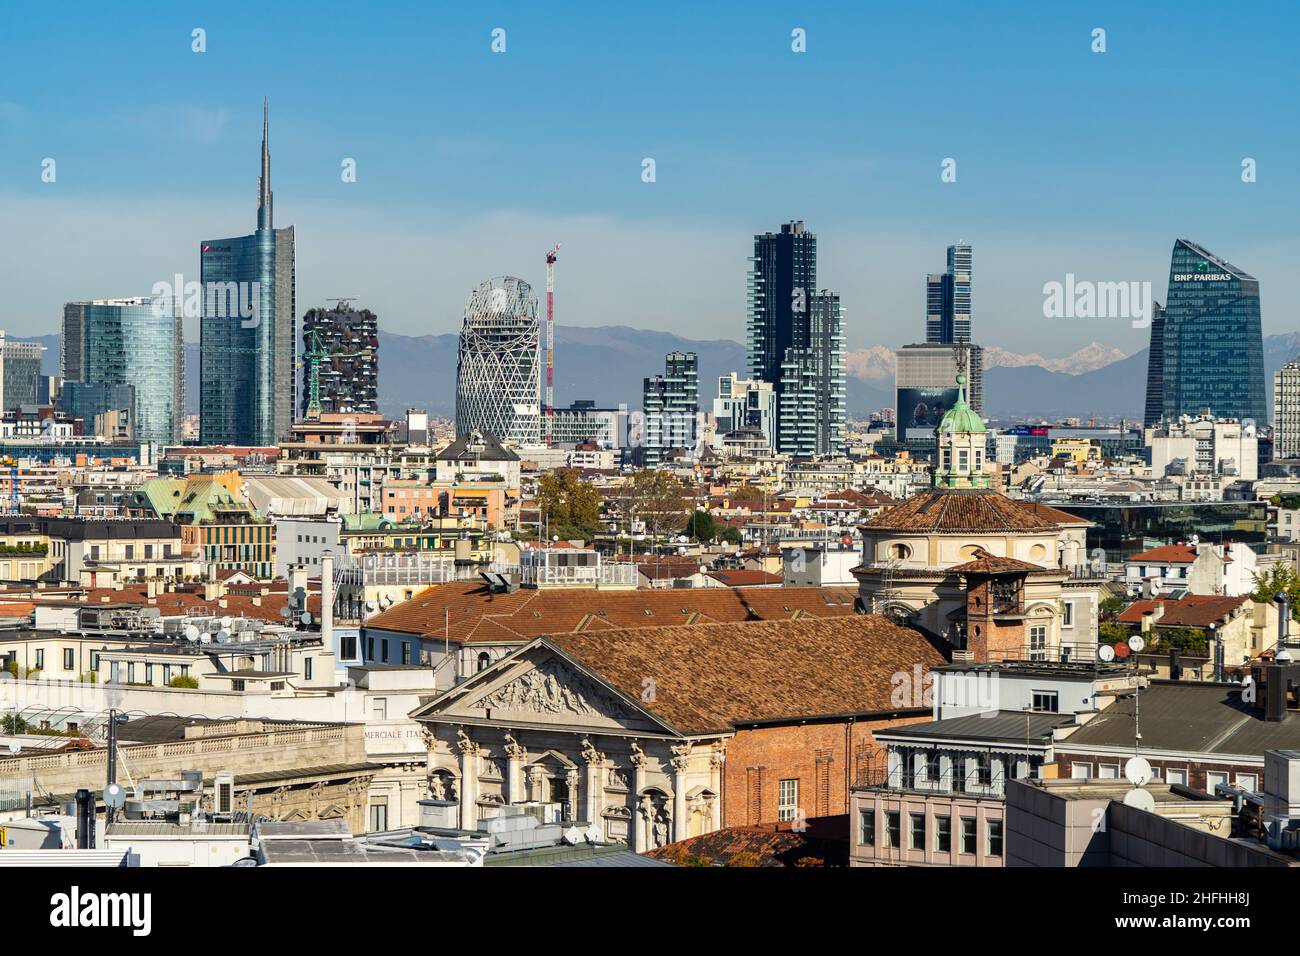 Panoramic view of Milan skyscrapers part of financial district near Porta Garibaldi station, Italy Stock Photo